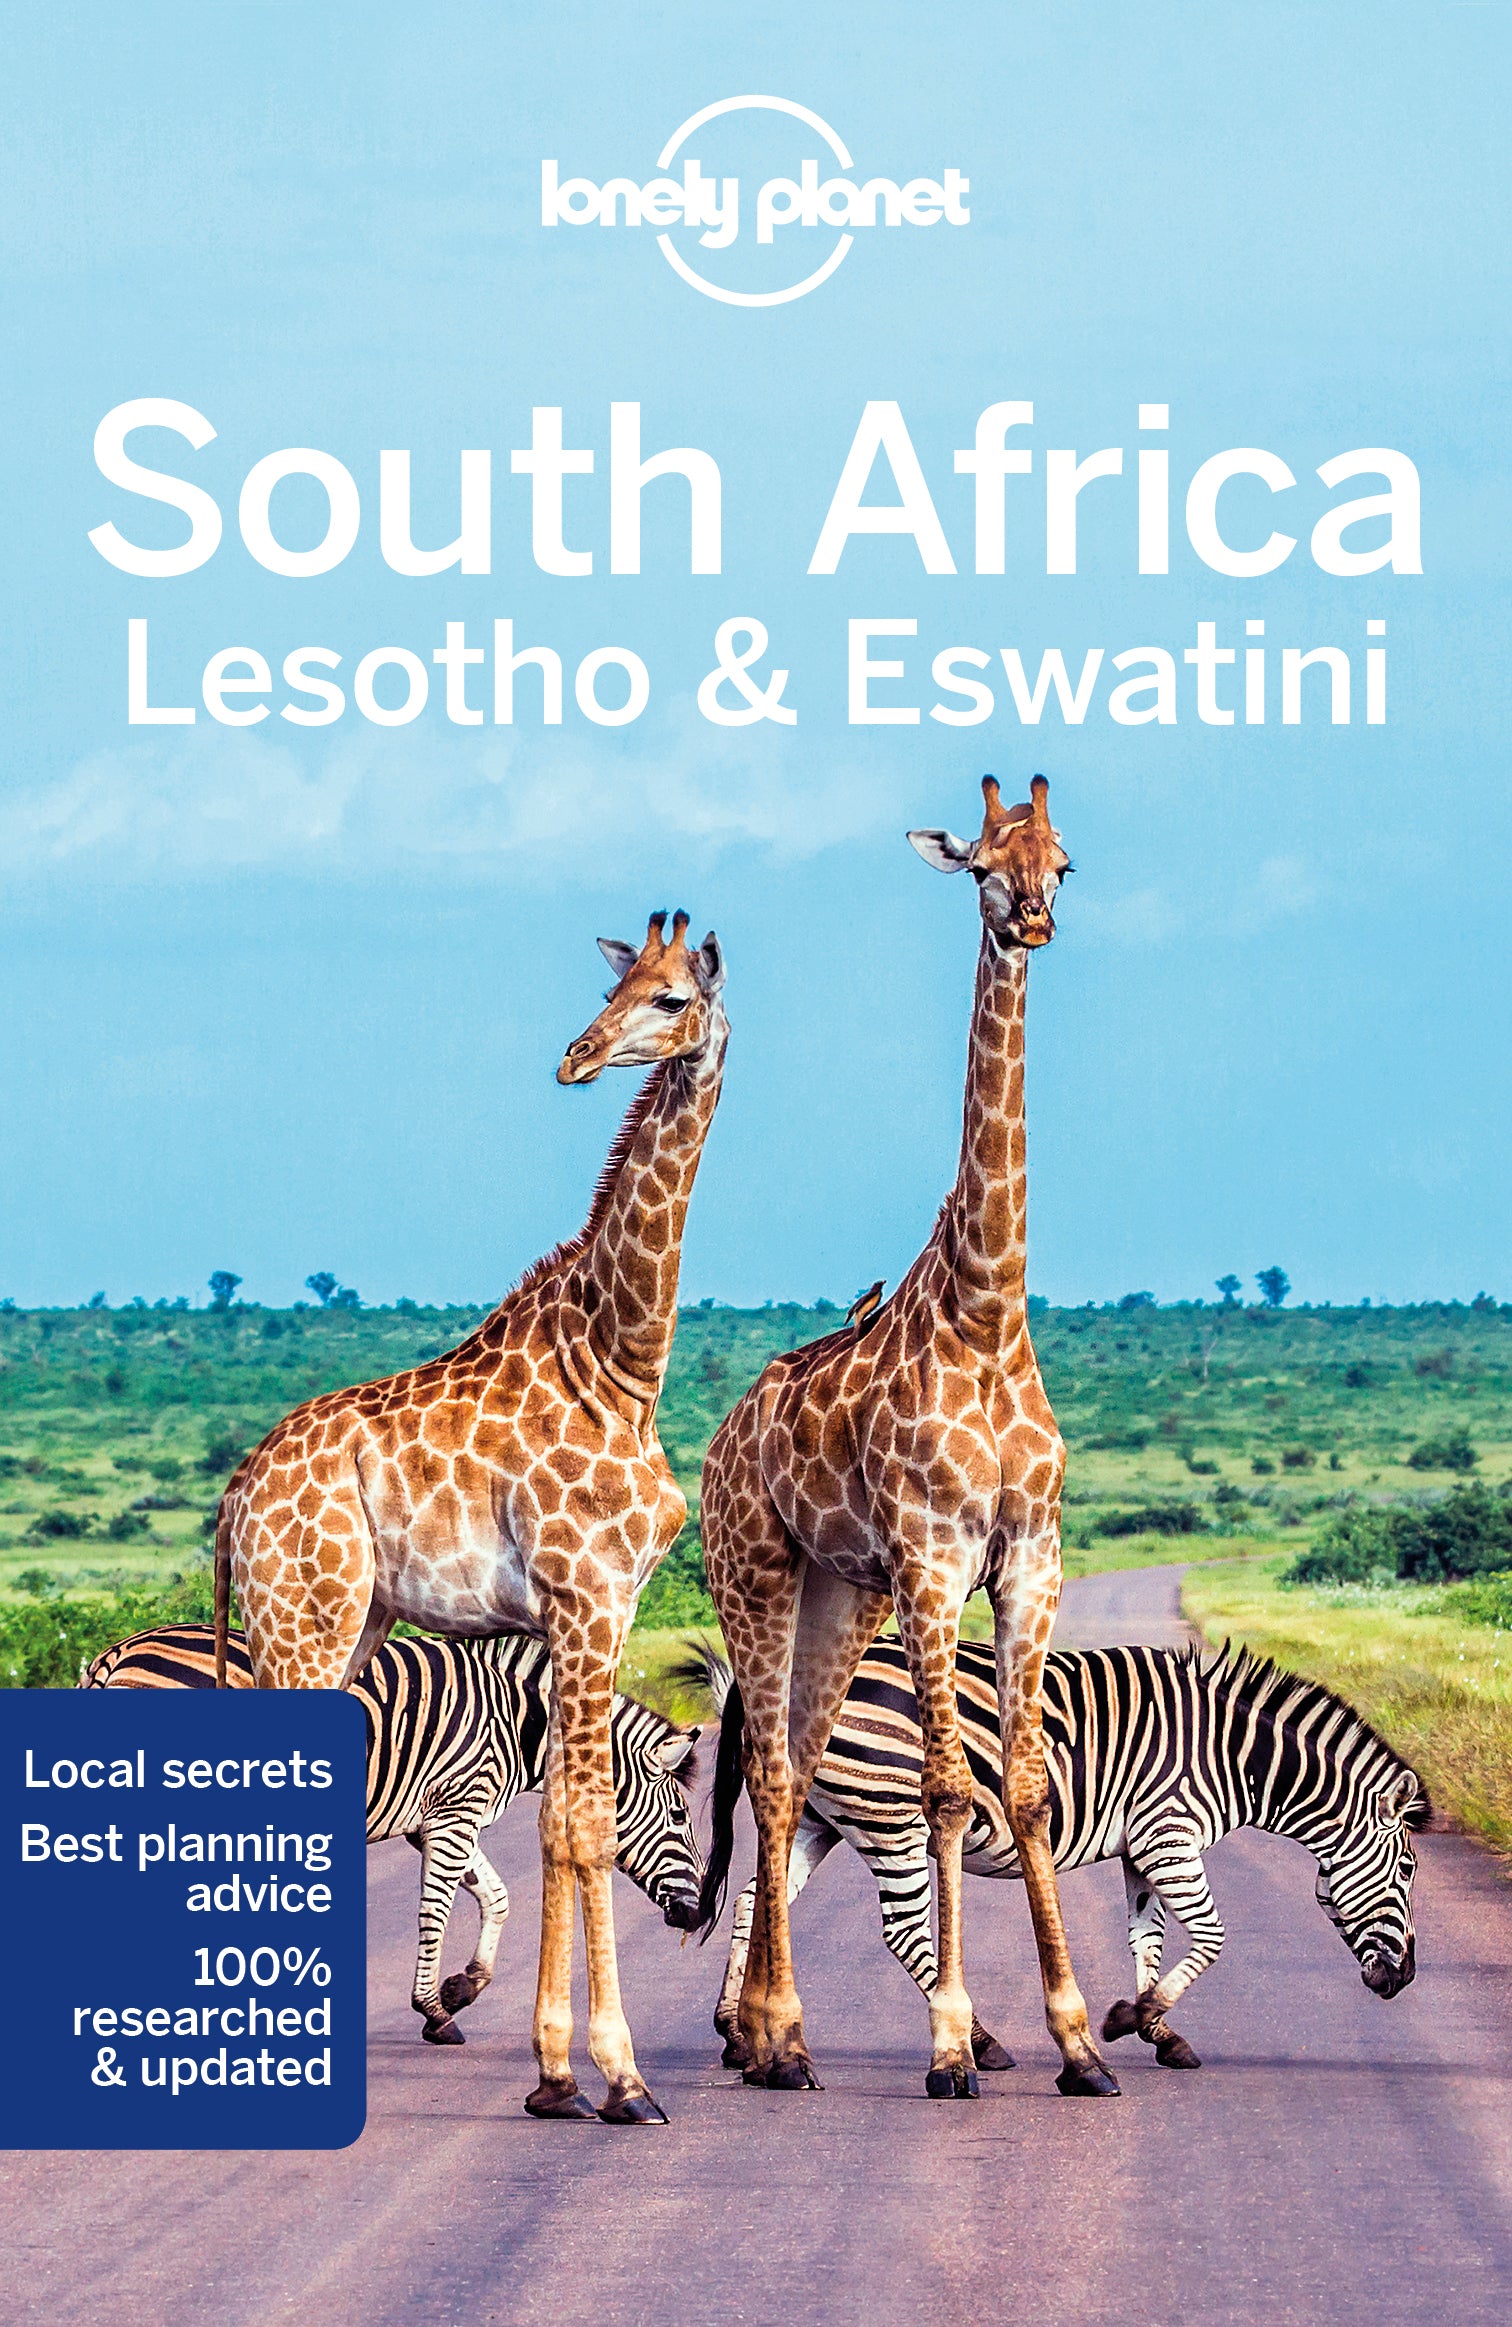 Lonely Planet South Africa, Lesotho & Eswatini (12th Edition)